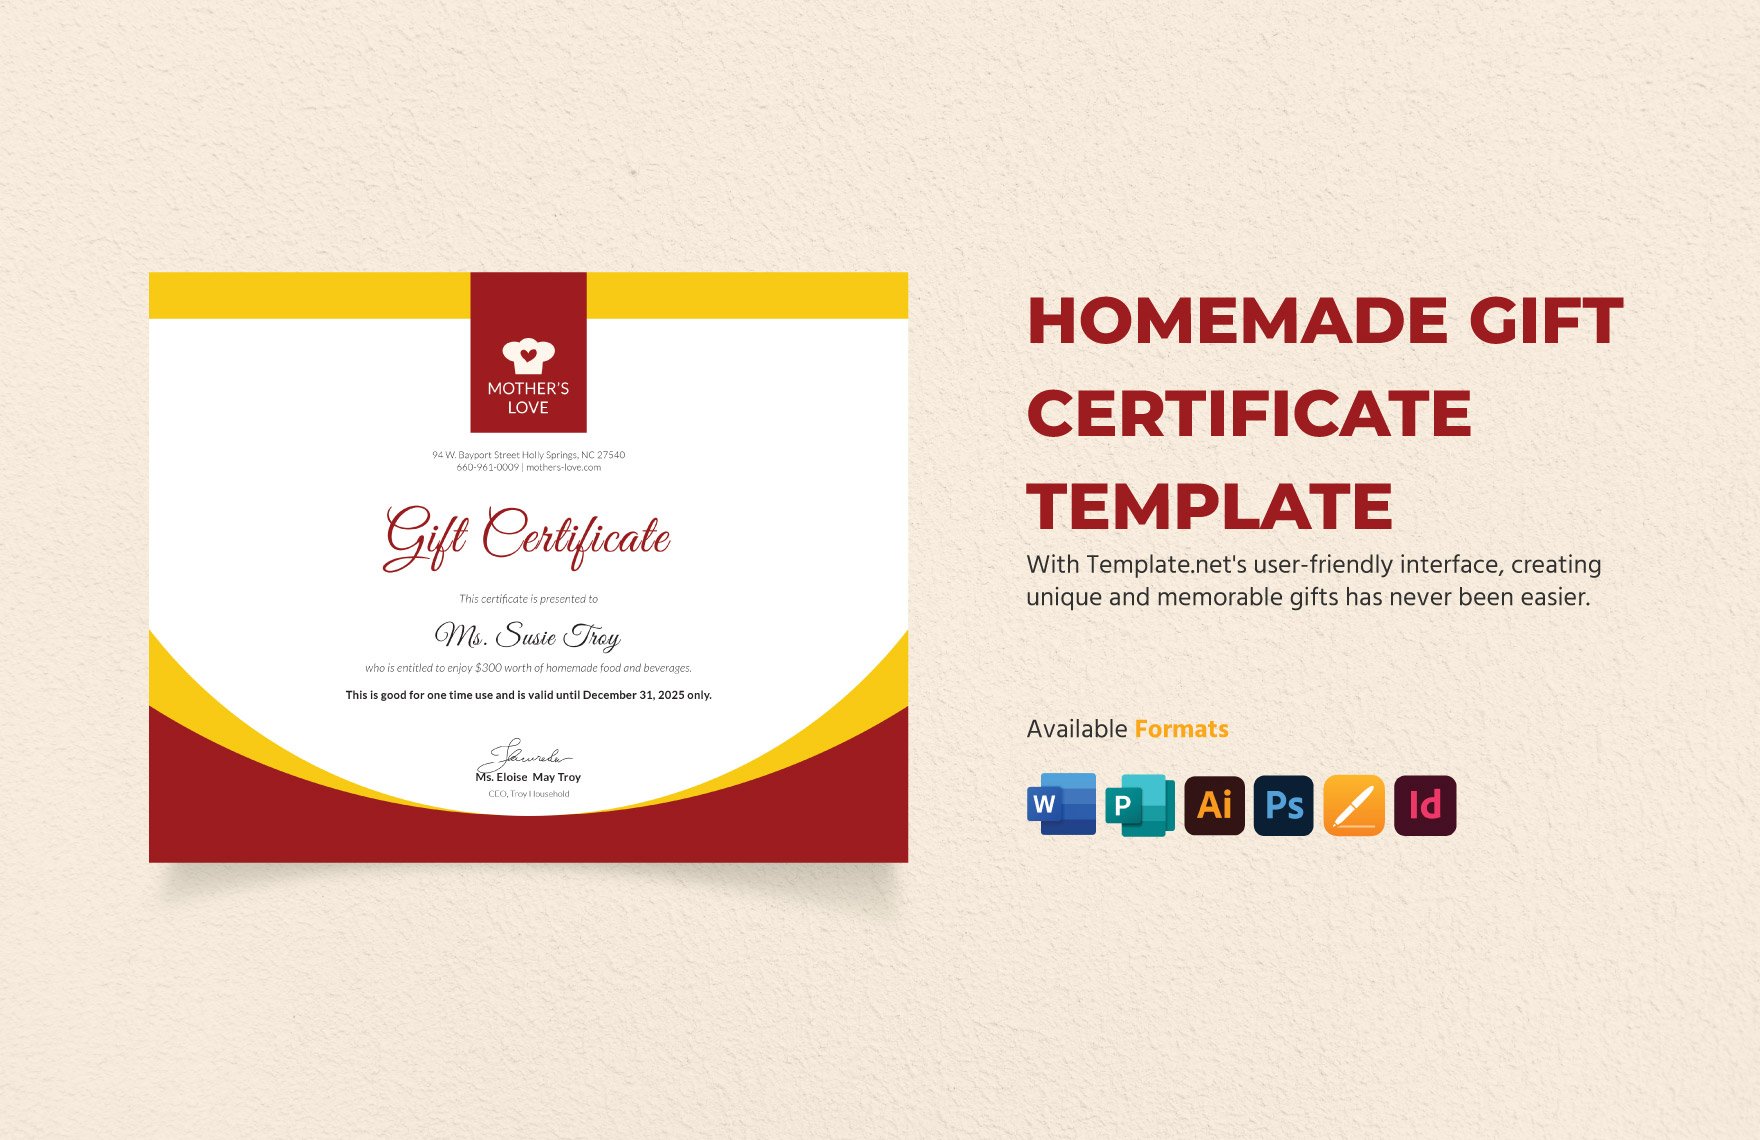 Homemade Gift Certificate Template in Word, Illustrator, PSD, Apple Pages, Publisher, InDesign